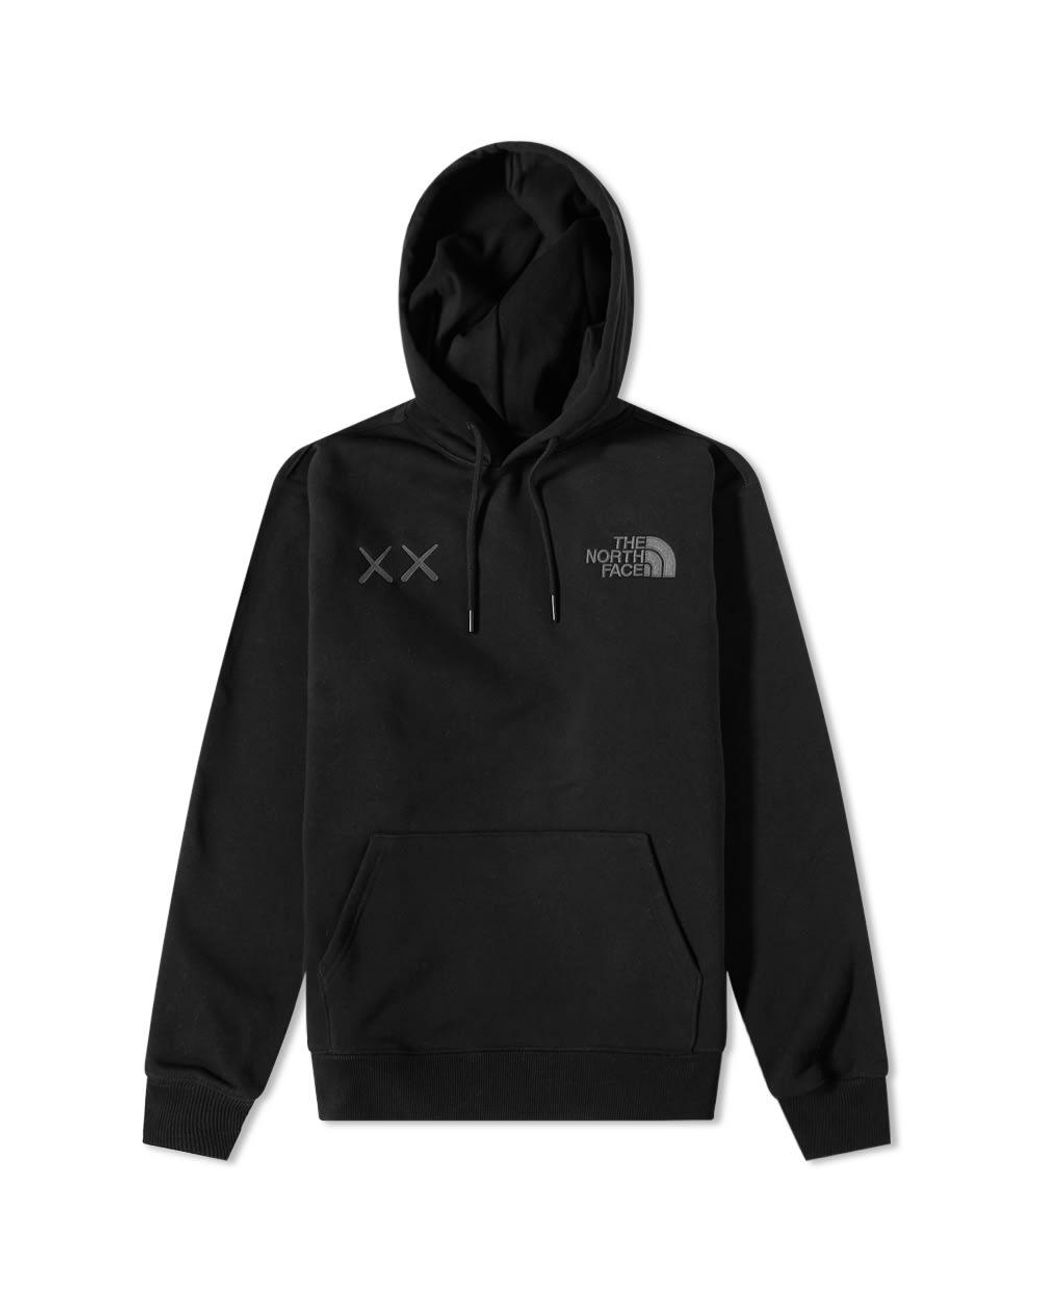 The North Face Kaws Hoodie